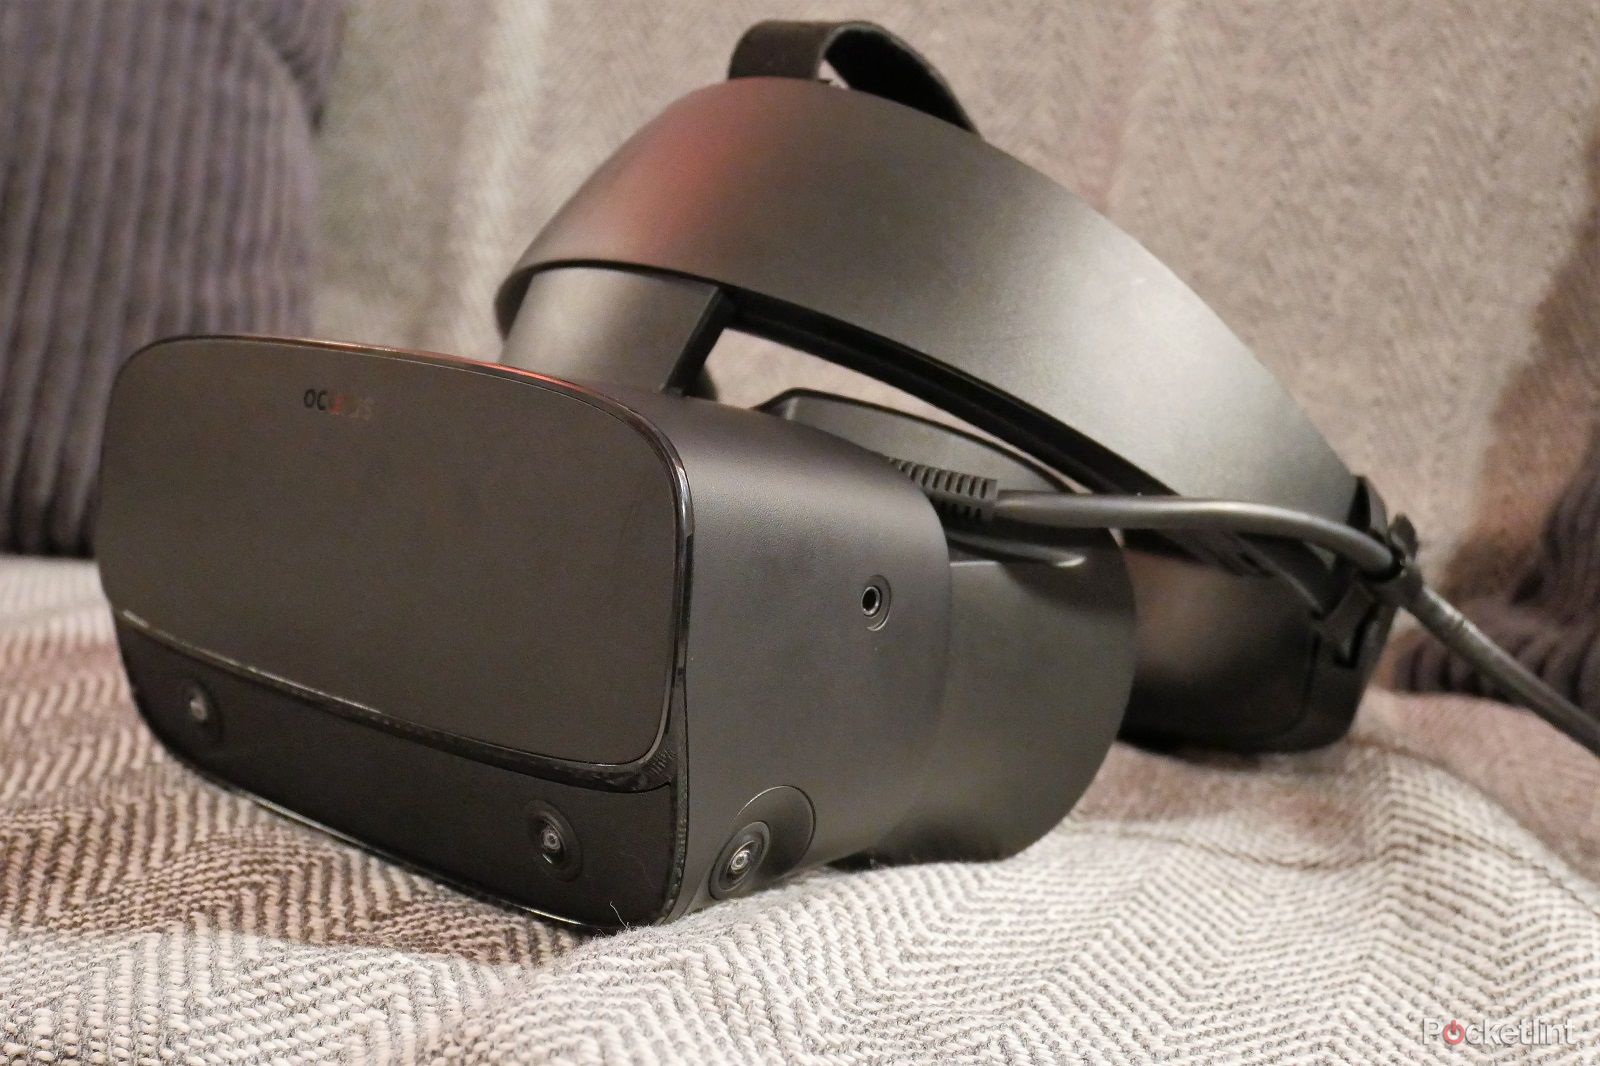 Oculus Rift S headset review image 3